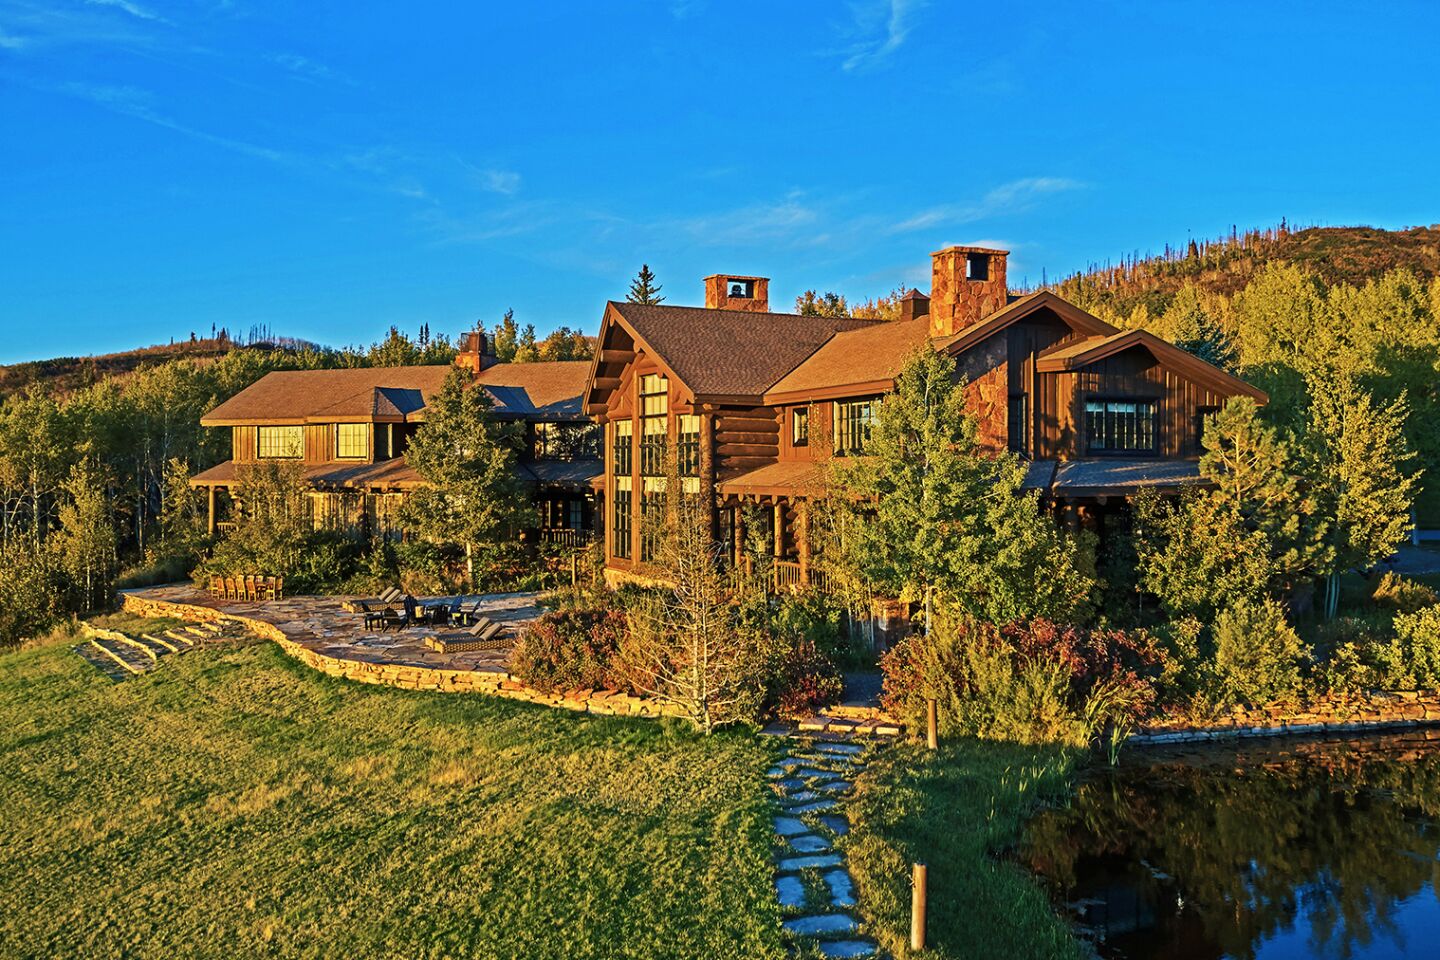 The lodge has 13,907 square feet.